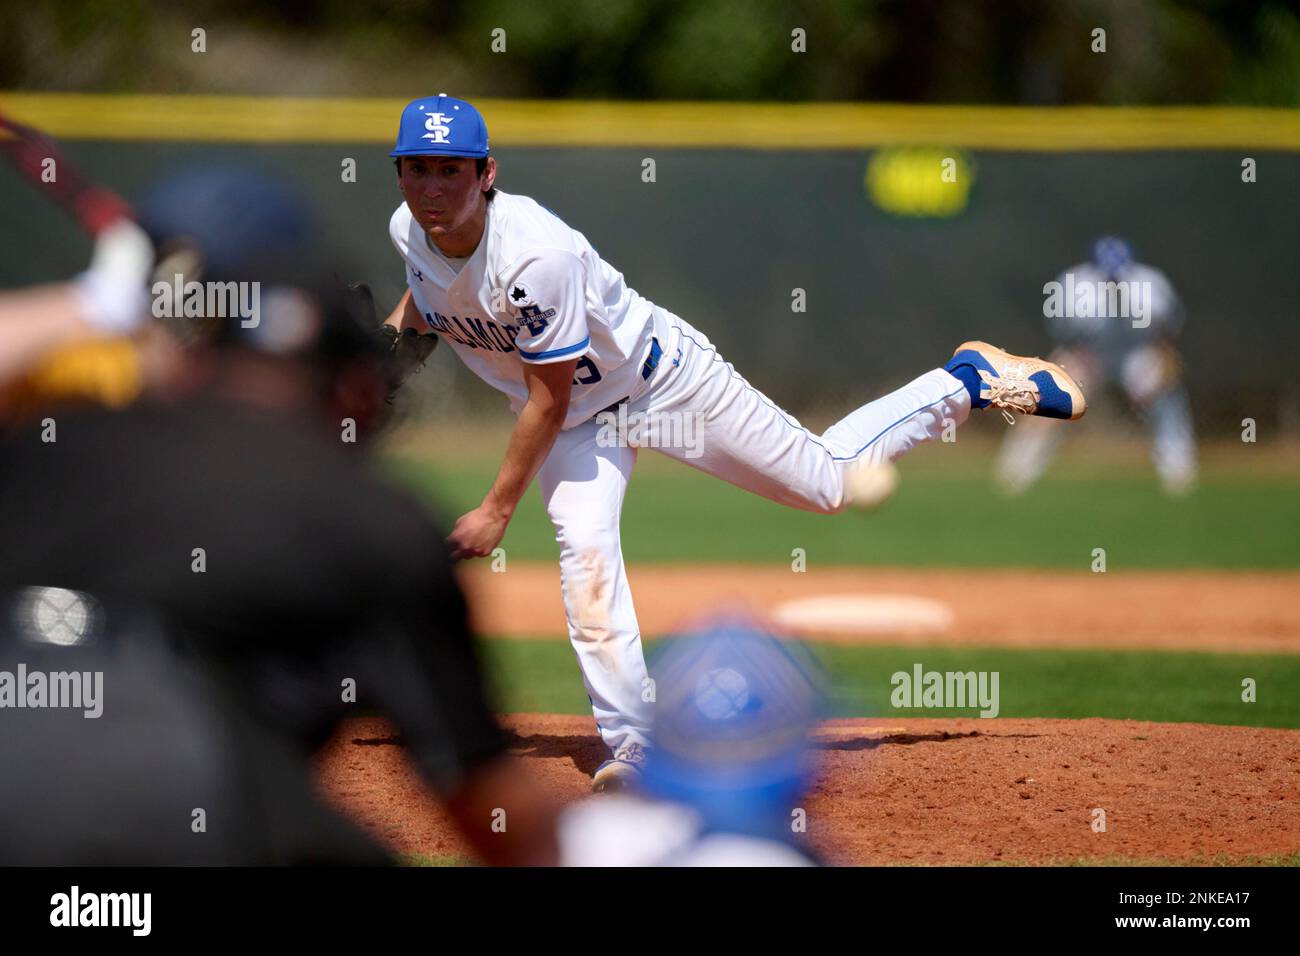 Indiana State Sycamores pitcher Will Goebel (39) during an NCAA baseball game against the Merrimack Warriors on February 25, 2022 at Centennial Park in Port Charlotte, Florida. (Mike Janes/Four Seam Images via AP) Stock Photo